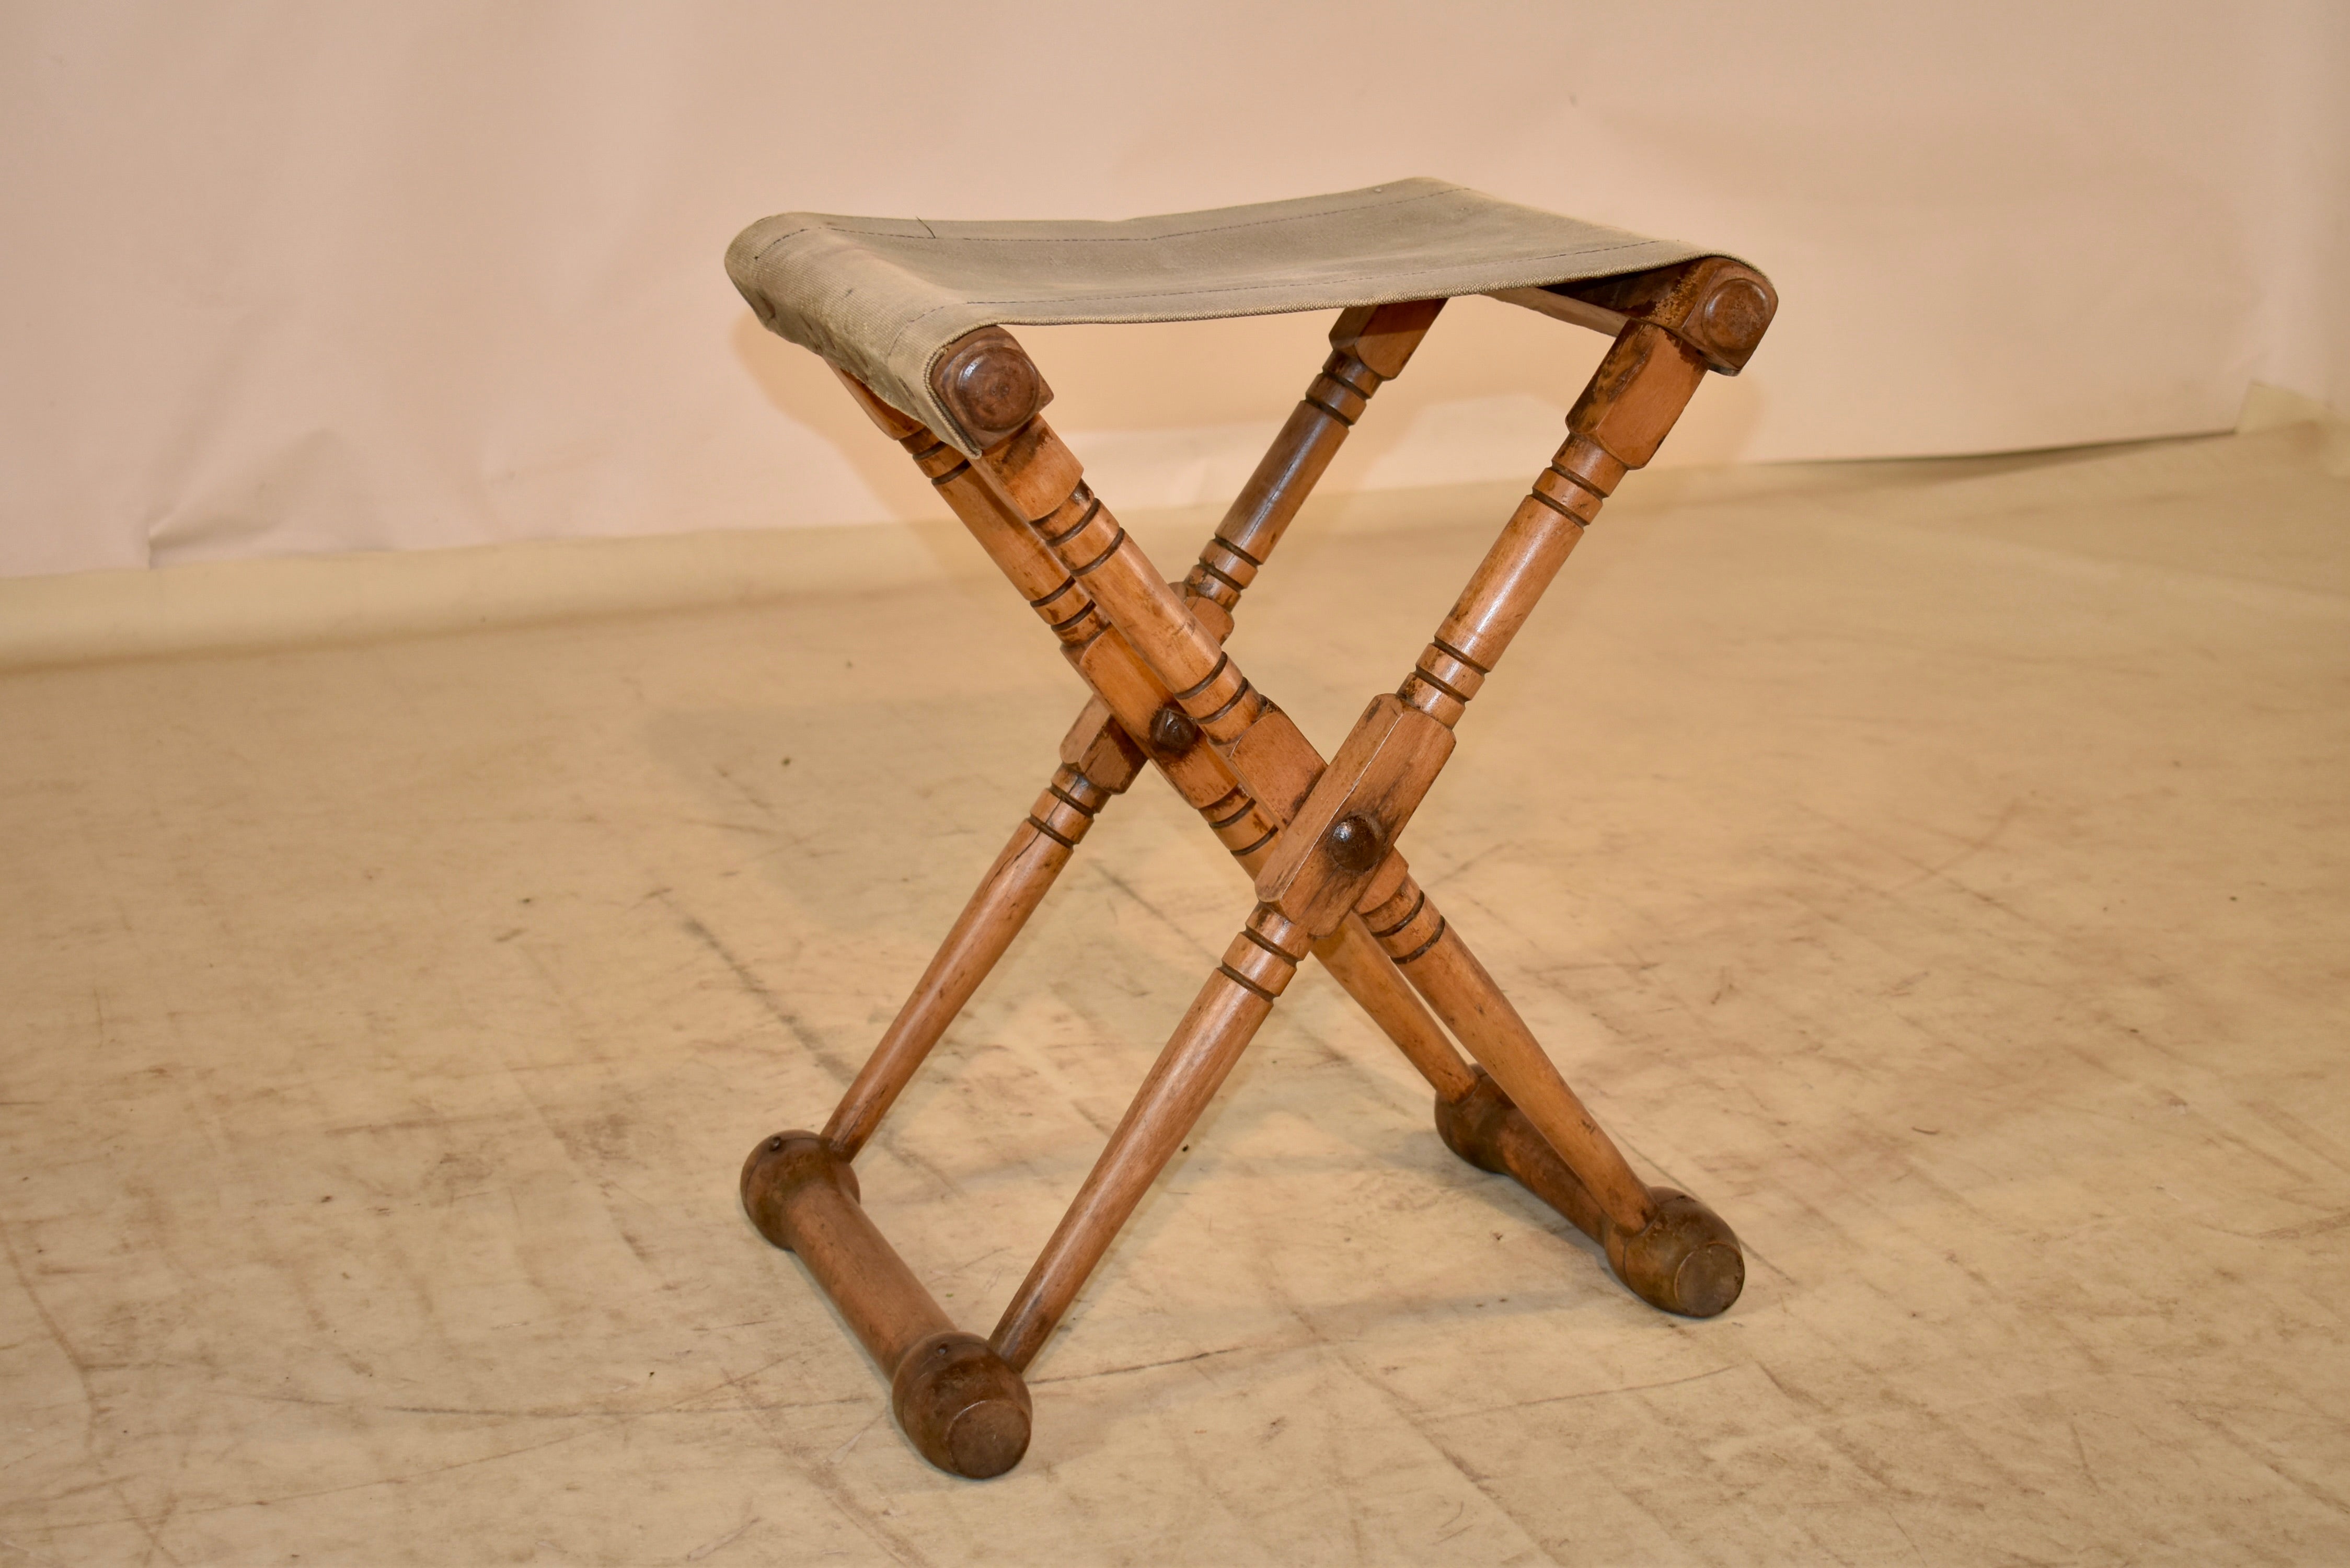 Late 19th century fruitwood folding campaign stool with a well used canvas seat. Wonderful in its simplicity and usefulness. These stools are the epitome of Campaign furniture which is so desirable and collectable in today's market. The measurements